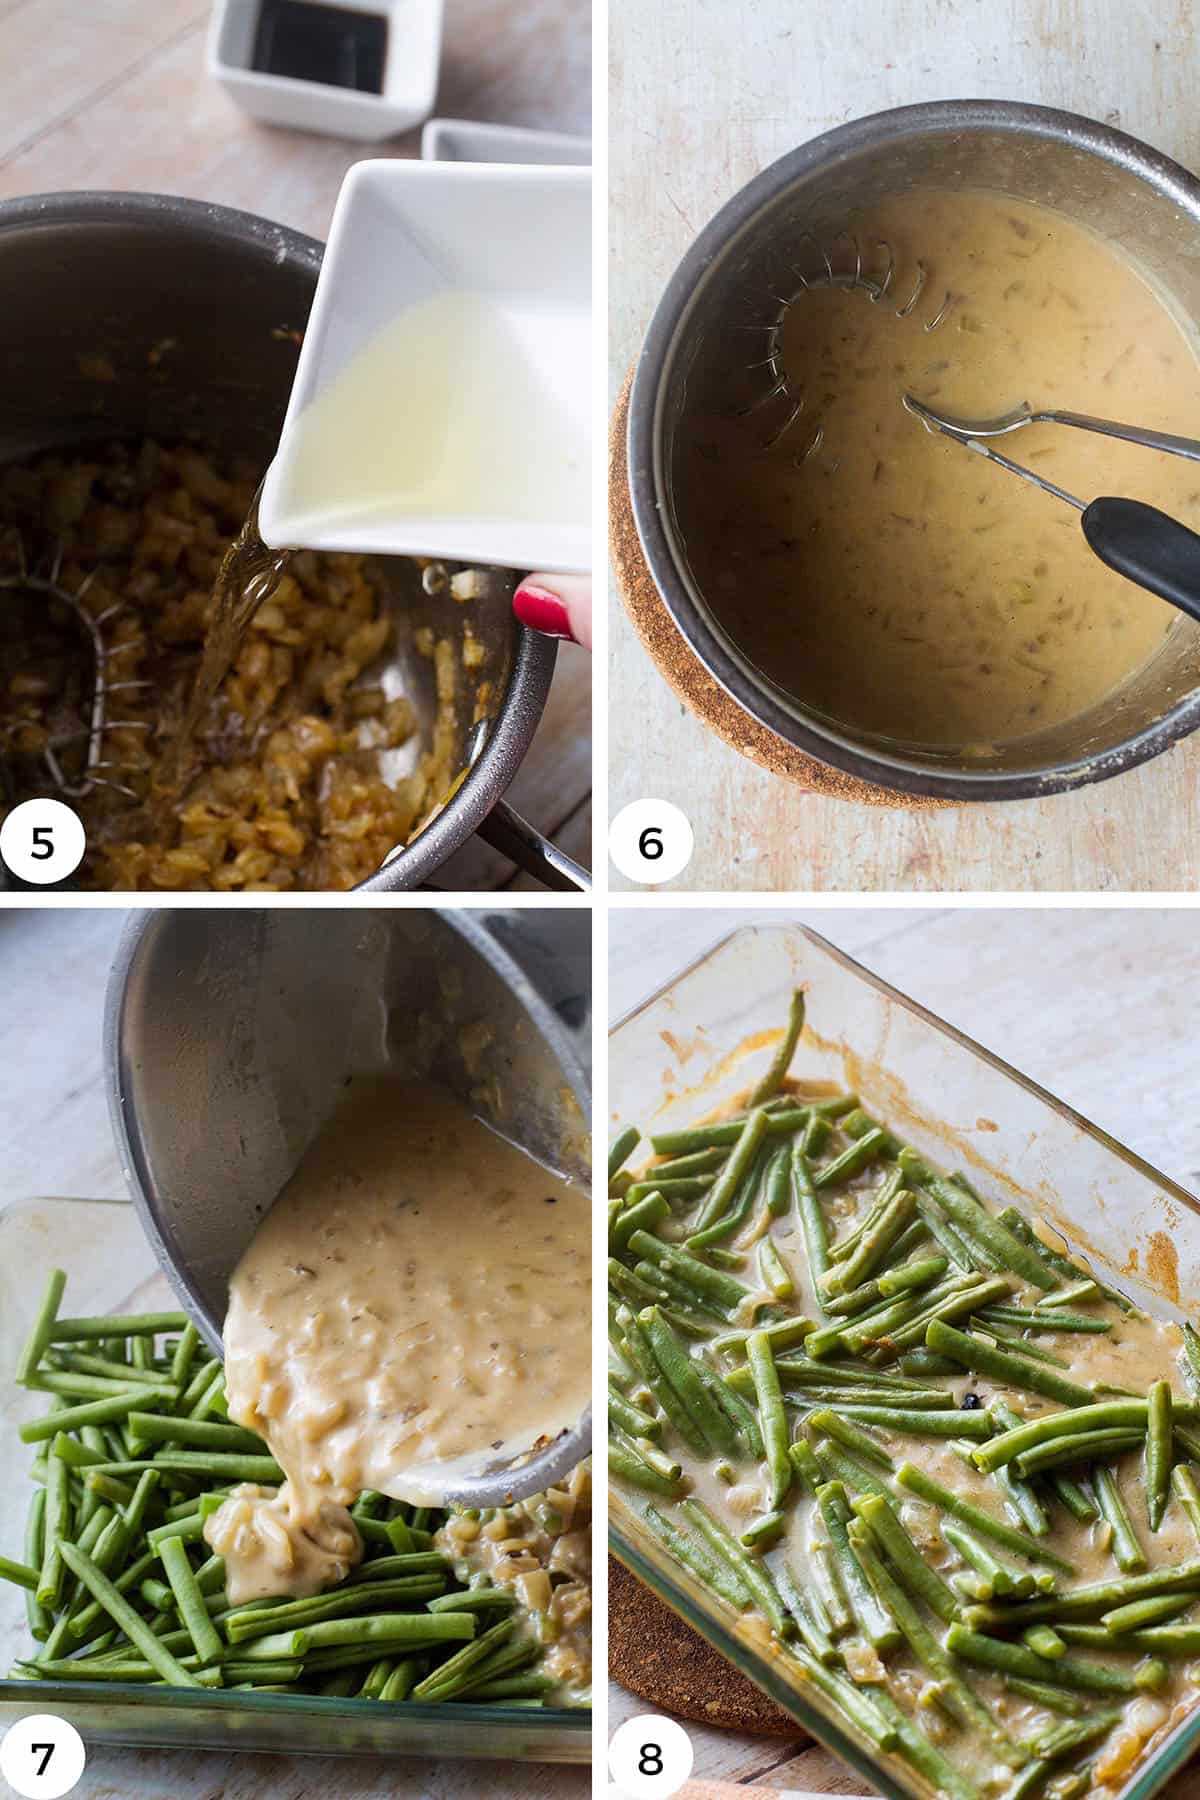 Steps to make the green beans.